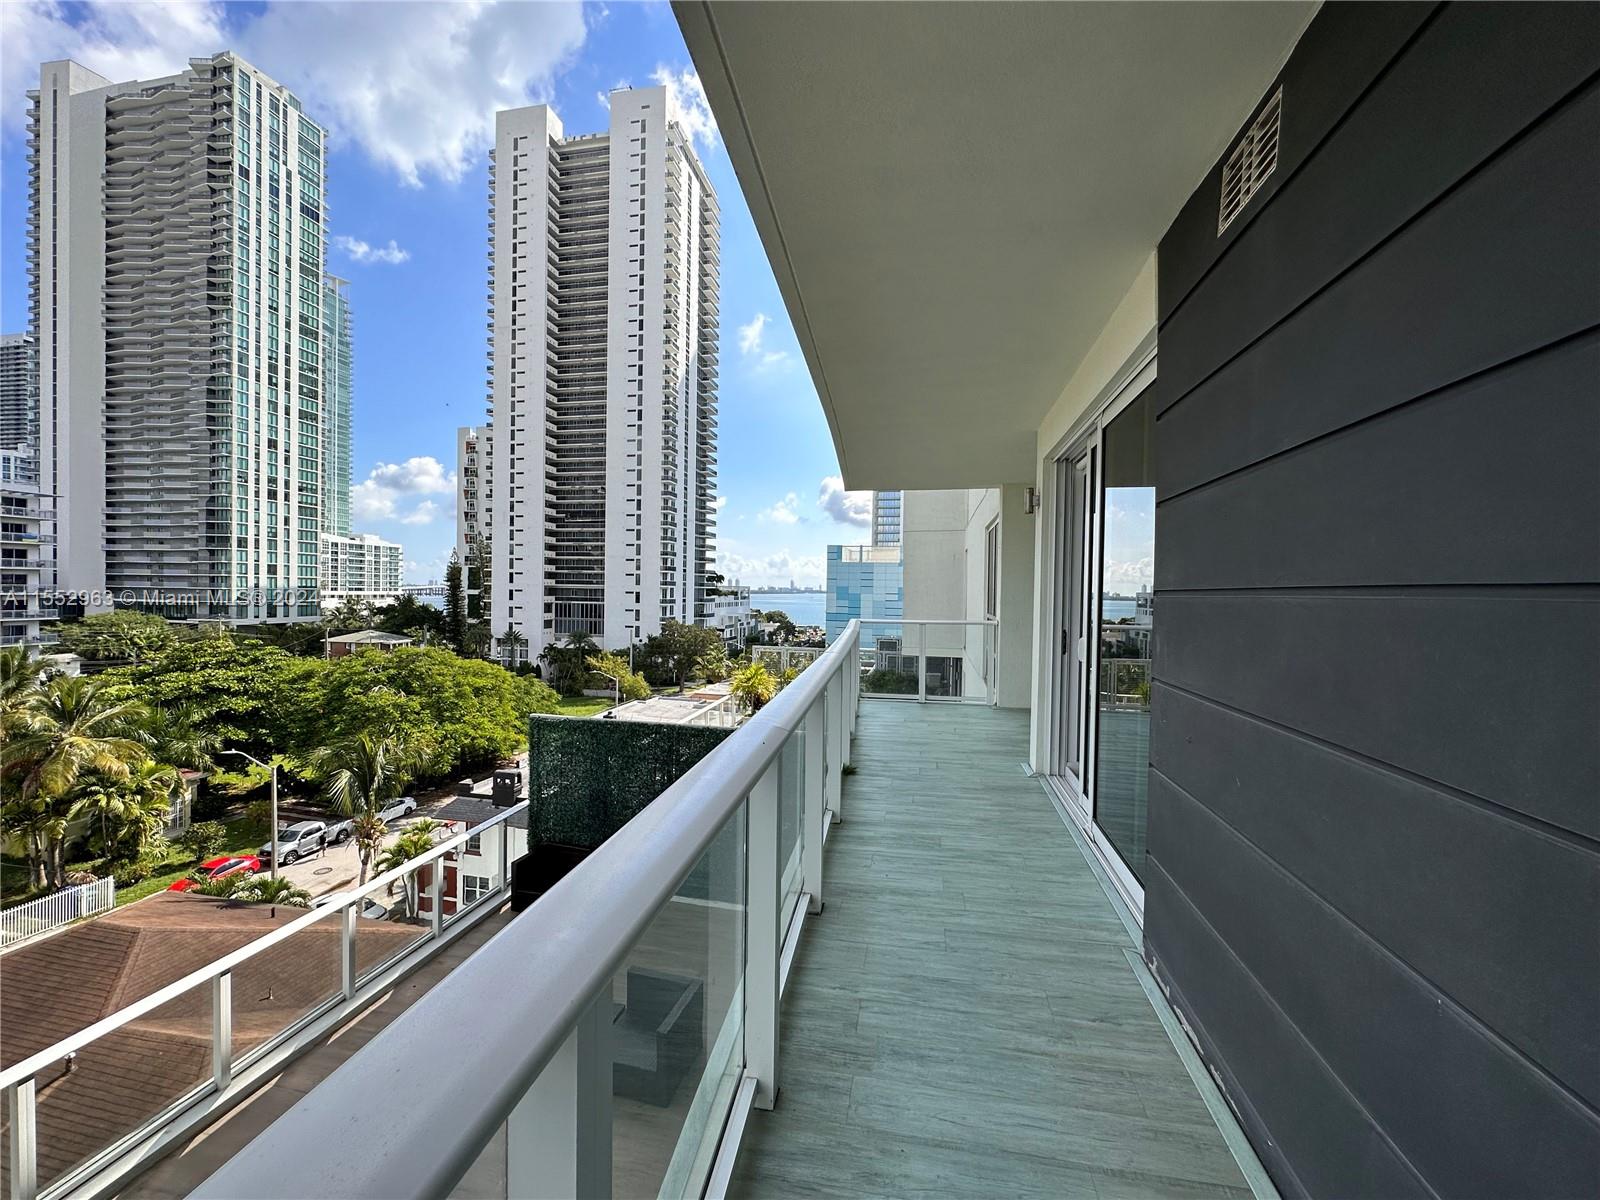 Beautiful 2 Bed/ 2 Bath unit with water and city views and expansive terrace in the popular Edgewater
 neighborhood. Boutique style building minutes from Downtown, Brickell, Midtown, Design District and much more!
 Unit features 9 foot ceilings, expansive living room. porcelain wood style floors, floor to ceiling impact windows and
 sliding doors. Residents of 26 Edgewater can enjoy amenities such as rooftop pool, lounge and sun deck, fitness
 center and party room. Tenant occupied until April 1, 2024